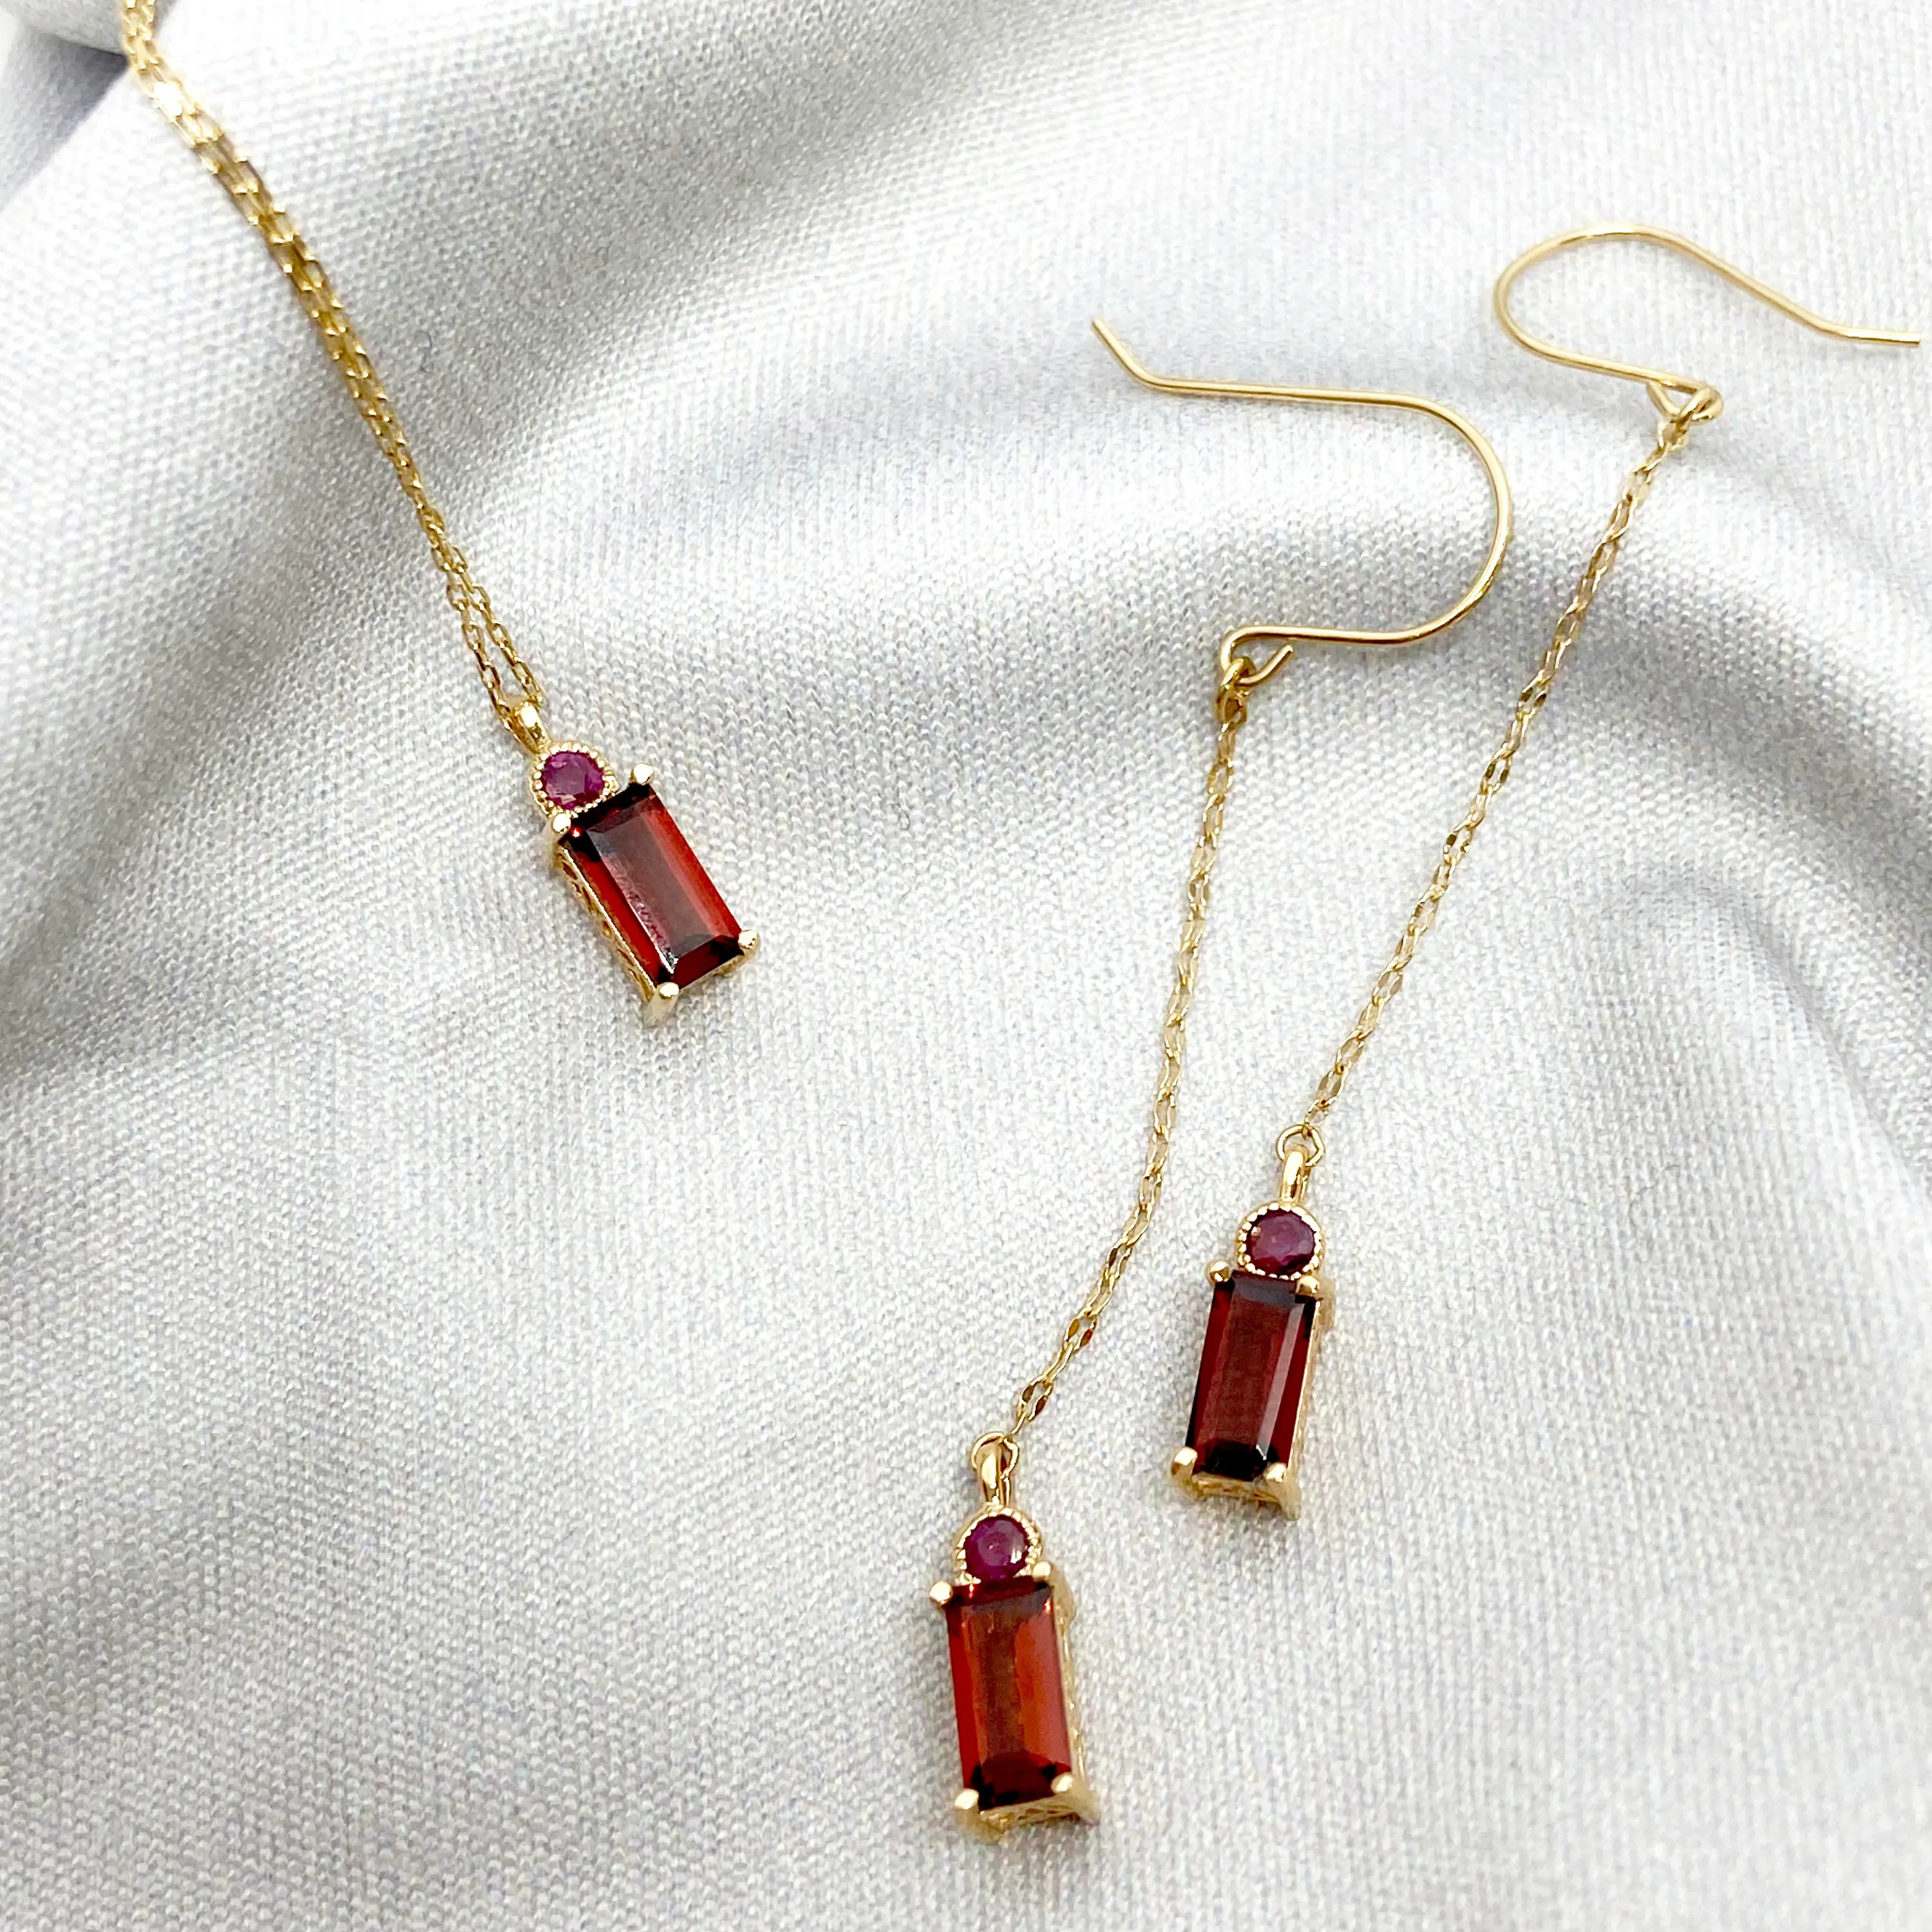 Sustainable sell well various unique Japan ladies high fashion jewelry ruby garnet gemstone